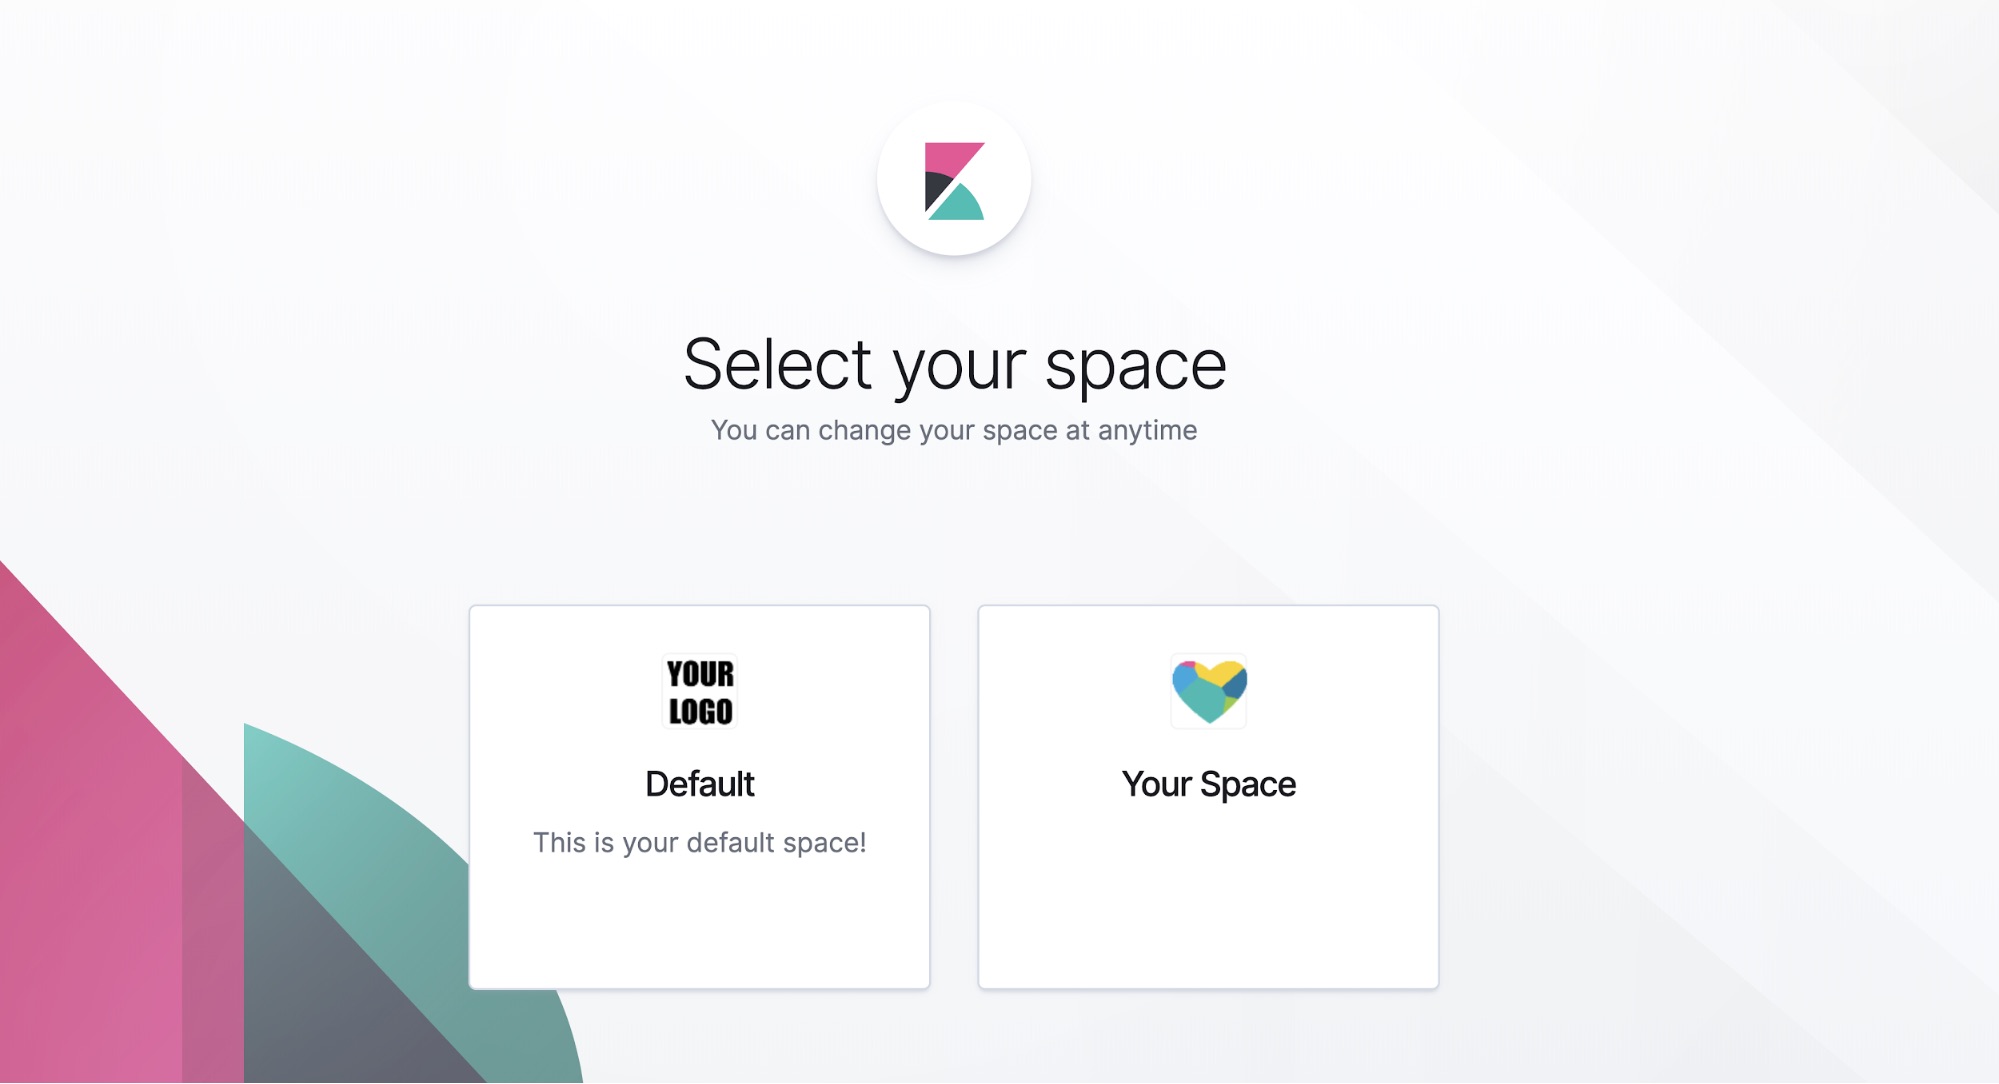 In Kibana 7-5 you can customize the icons associated with each of your Spaces by uploading custom images.